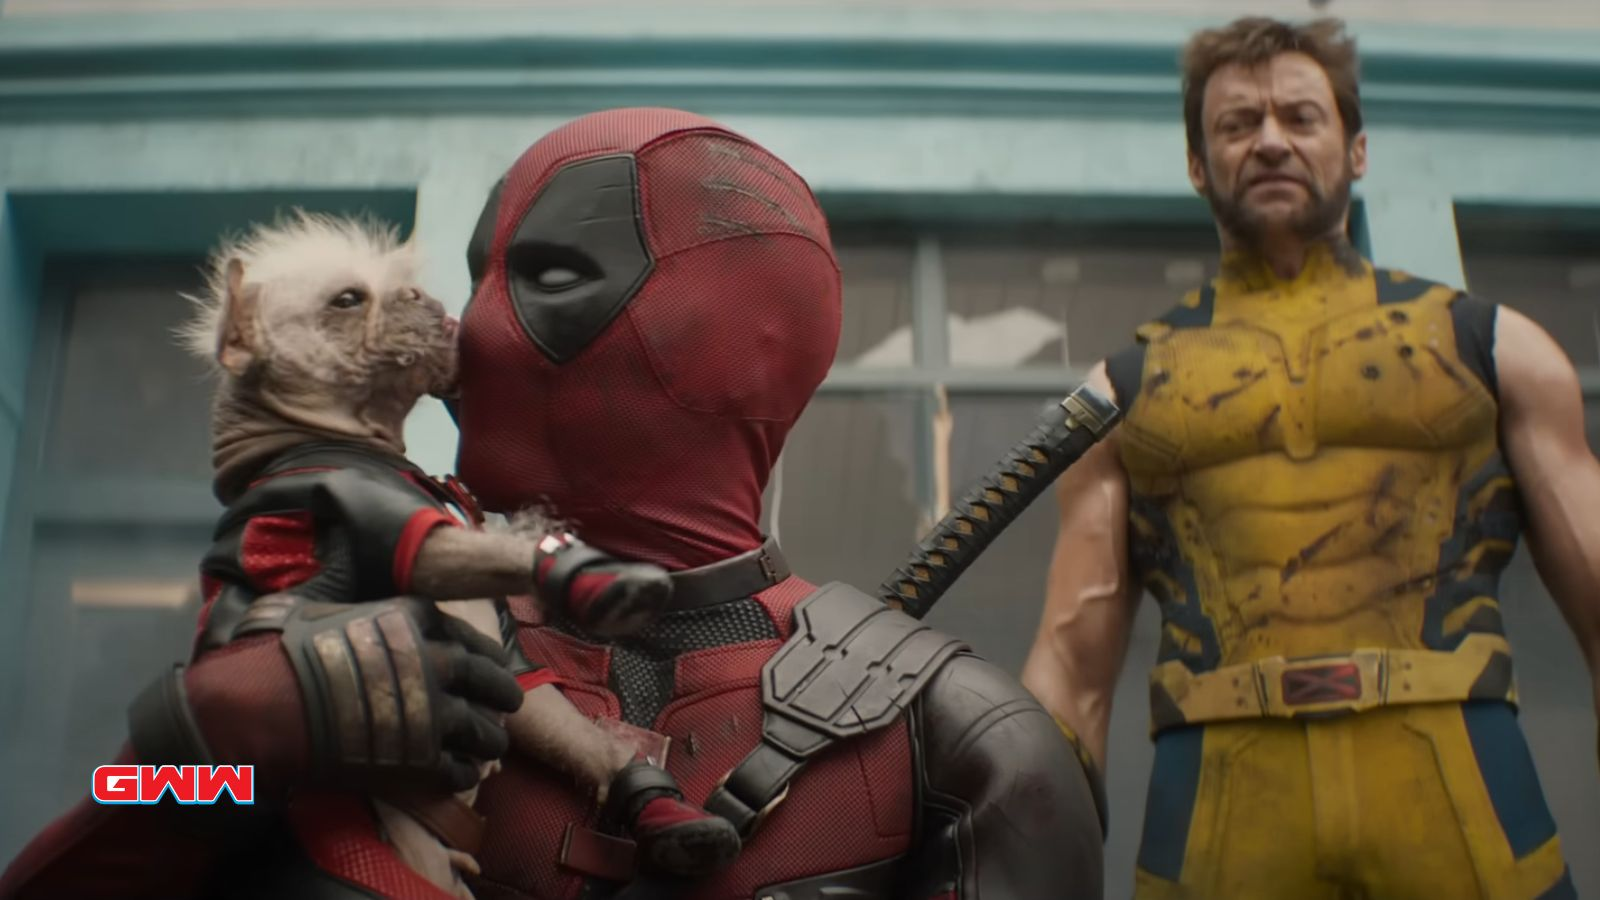 Deadpool in a funny scene with a small dog from Deadpool 3 trailer